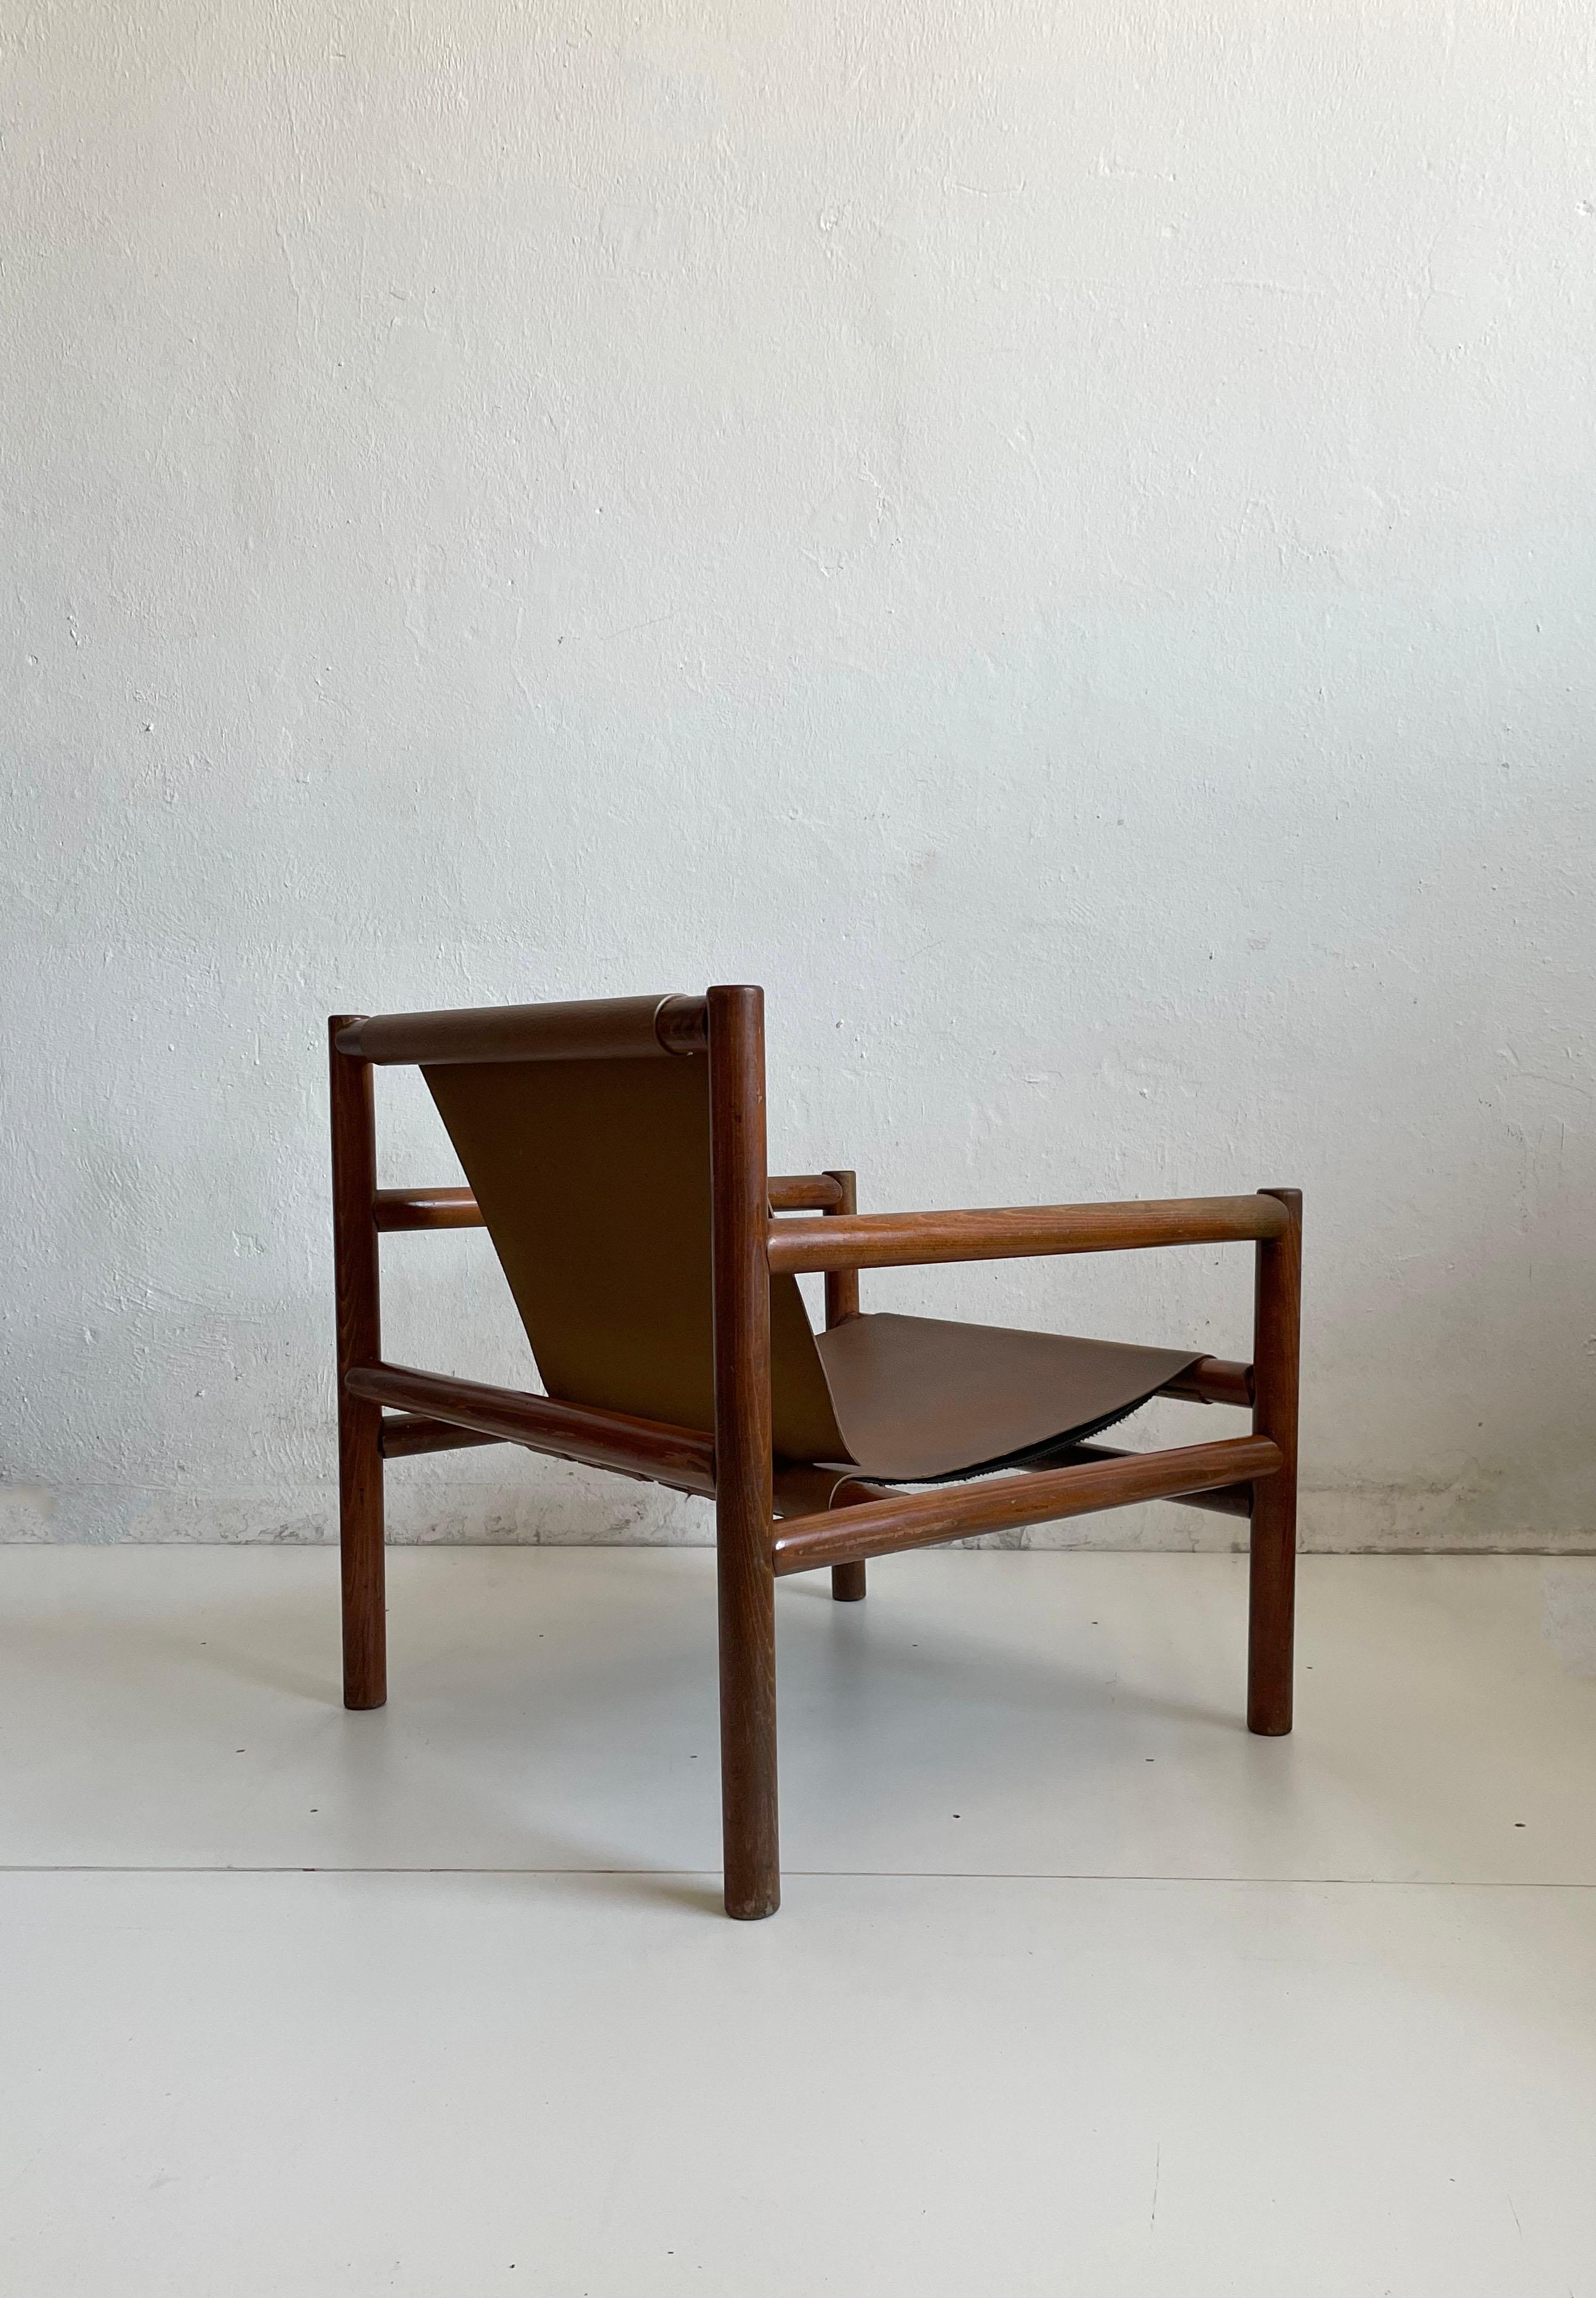 20th Century Mid-Century Modern Wooden Armchair, Faux Leather Seating, Stol Kamnik 1970s For Sale